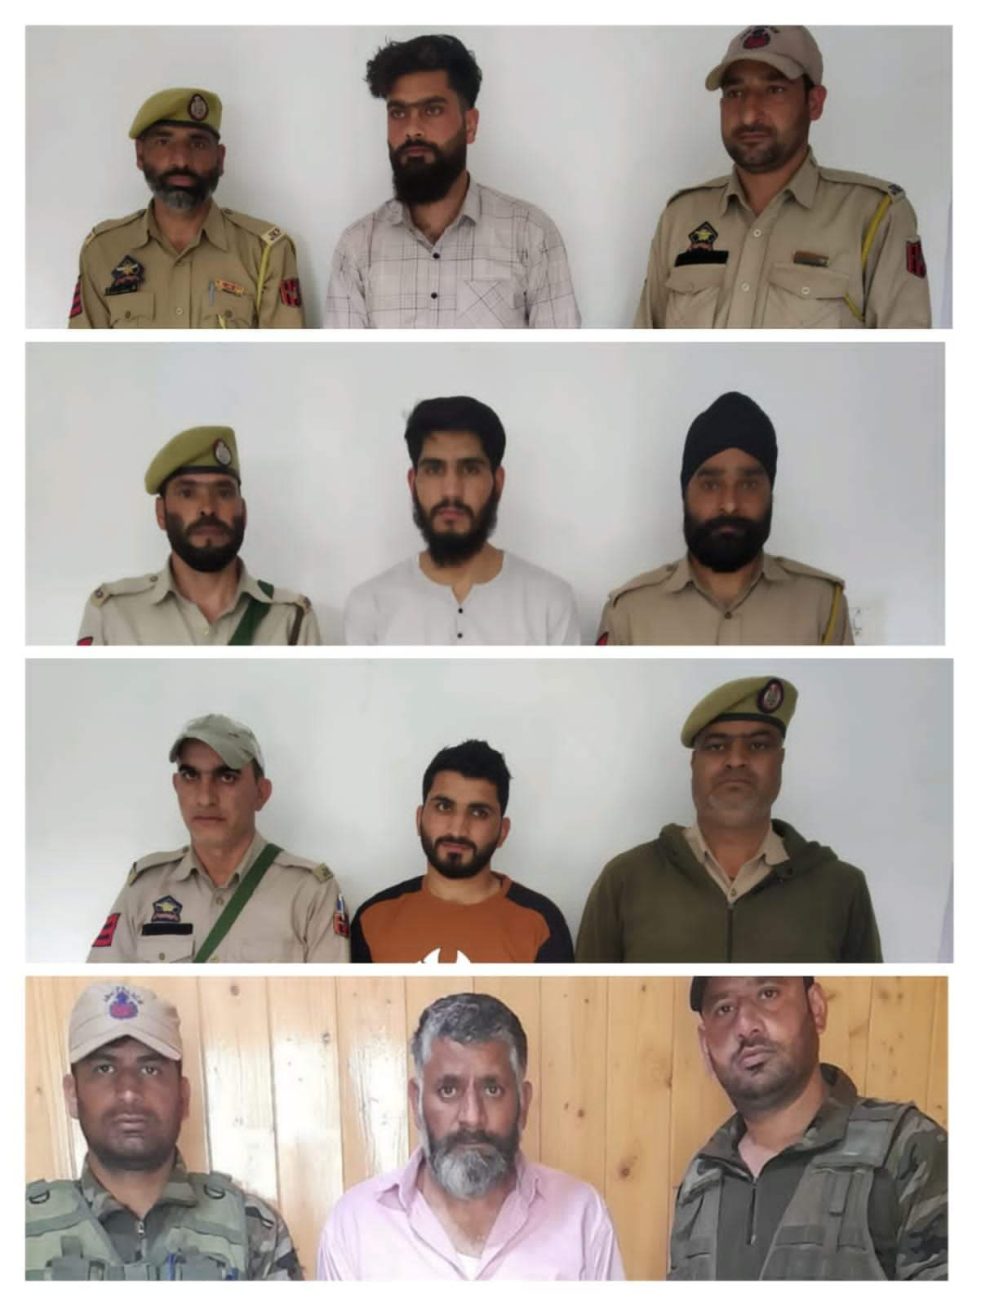 4 booked under PSA in Baramulla for anti-national activities: Police